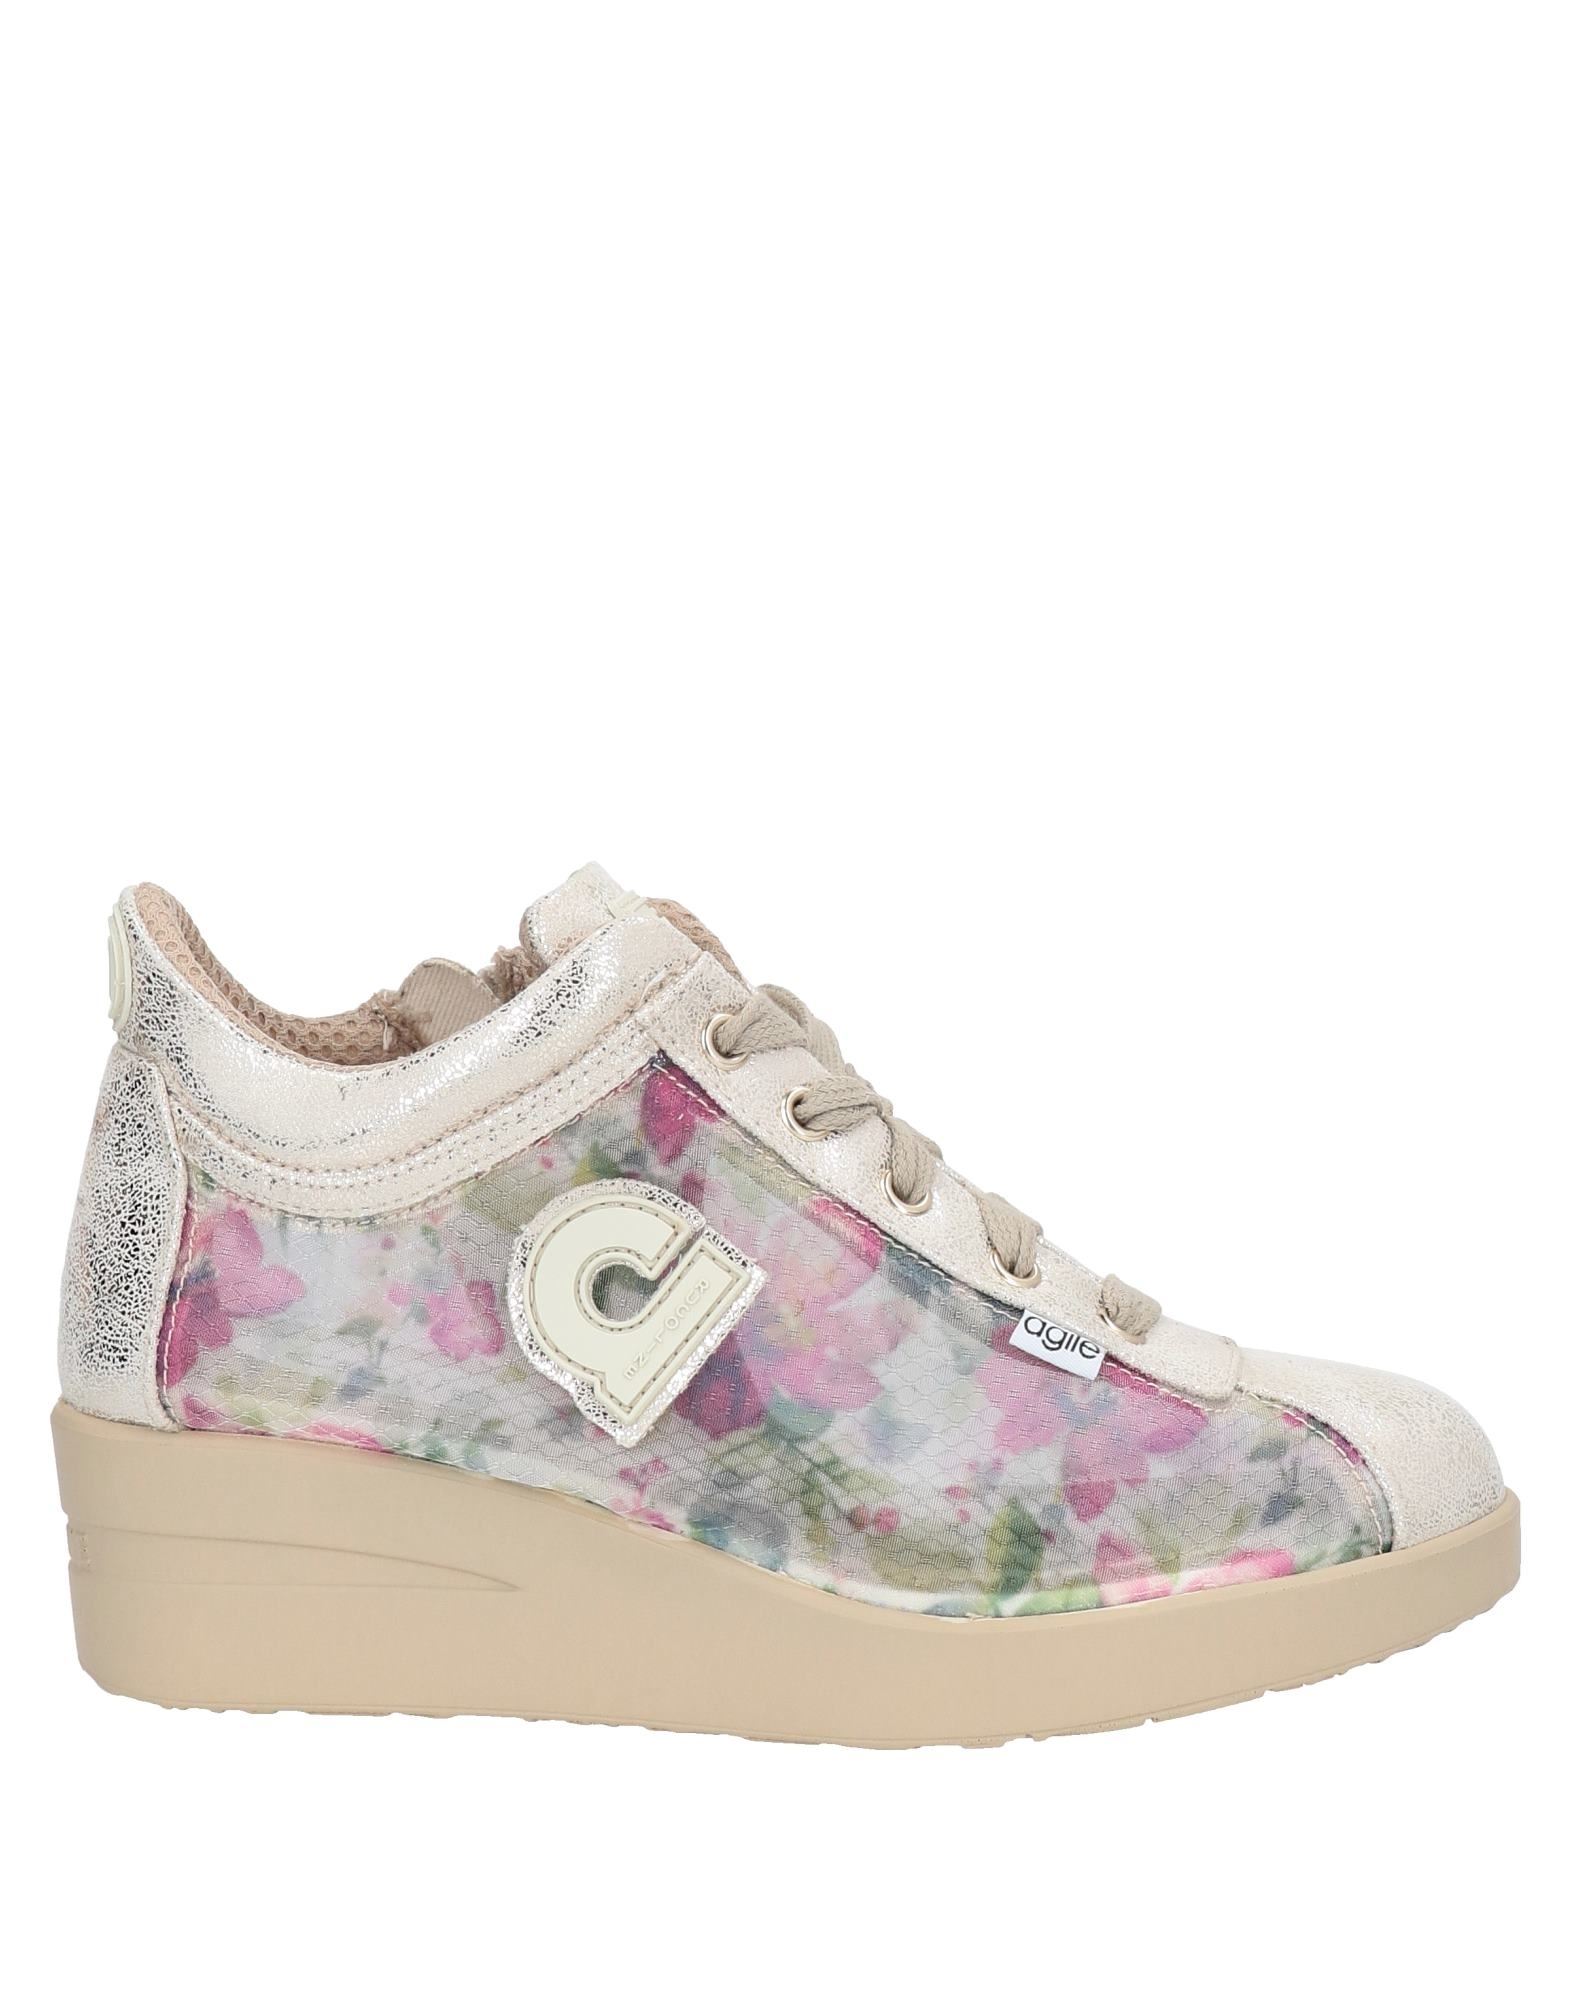 AGILE BY RUCOLINE SNEAKERS